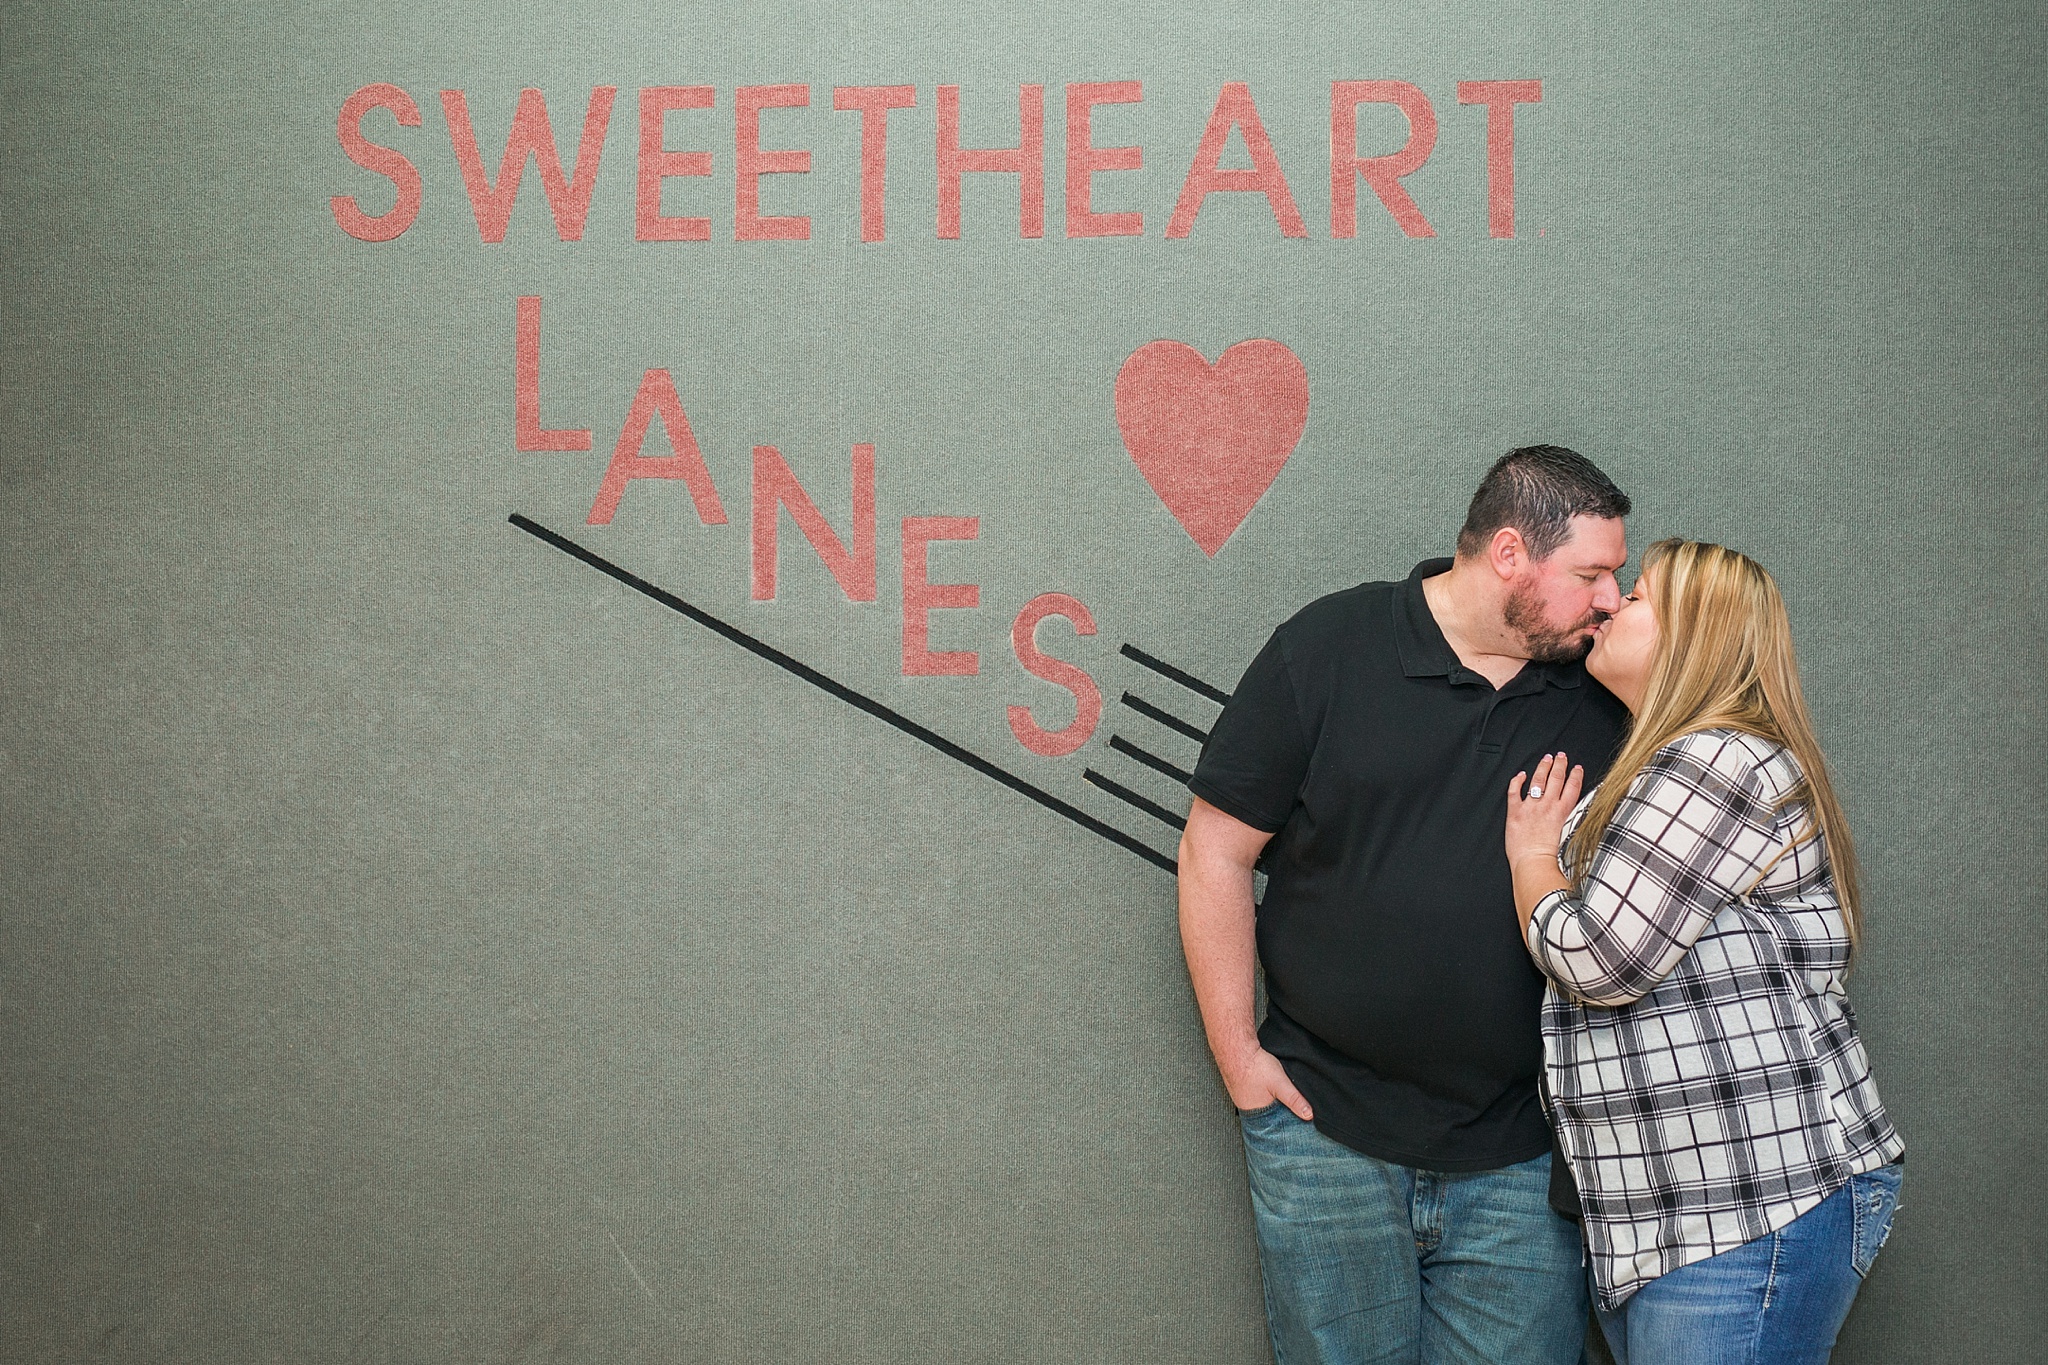 Couple kissing in front of sign during their bowling alley engagement session. Briana & Kevin’s Devil’s Backbone and Sweetheart Lanes Engagement Session by Colorado Engagement Photographer, Jennifer Garza. Devil's Backbone Engagement, Devil's Backbone Engagement Session, Loveland Engagement Session, Colorado Engagement Photography, Colorado Engagement Photos, Sweetheart Lanes Bowling Alley, Bowling Alley Engagement, Bowling Engagement Session, Bowling Engagement Photography, Wedding Inspo, Colorado Wedding, Colorado Bride, Brides of Colorado, Bride to Be, Couples Goals